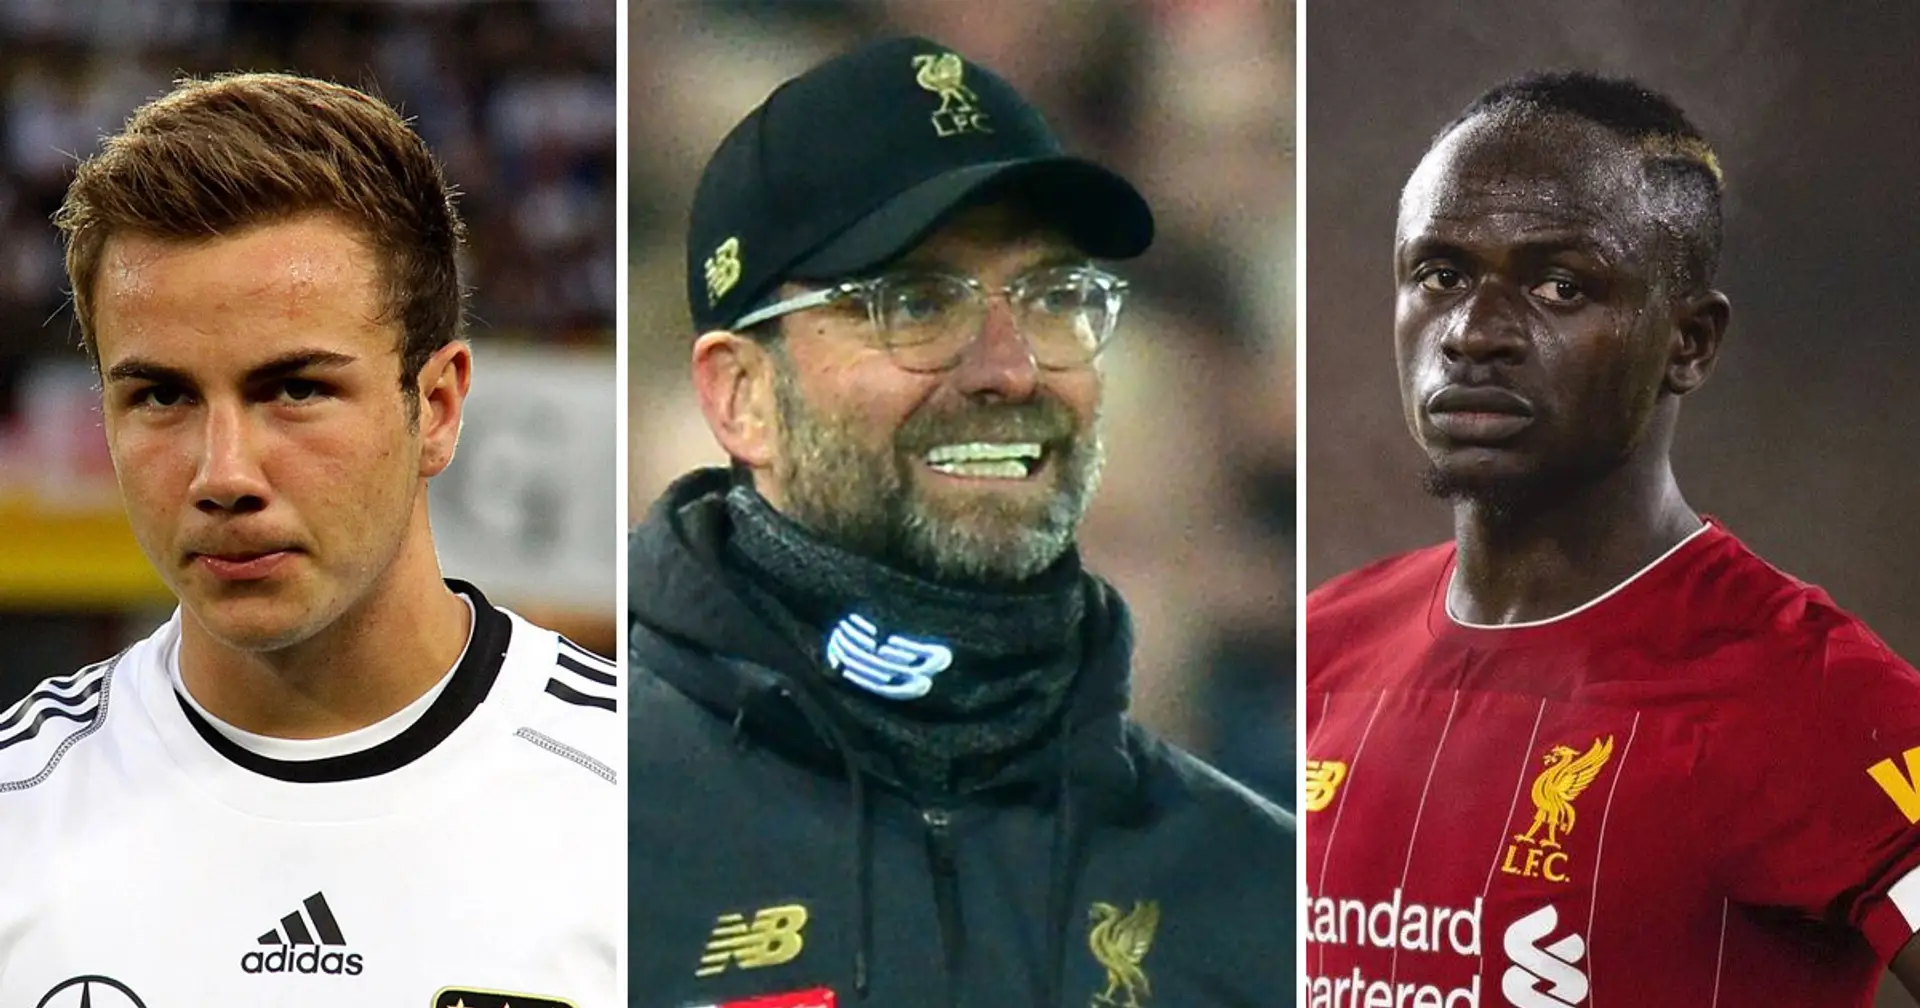 'Blessing in disguise': how missing out on World Cup winner helped Liverpool land Sadio Mane